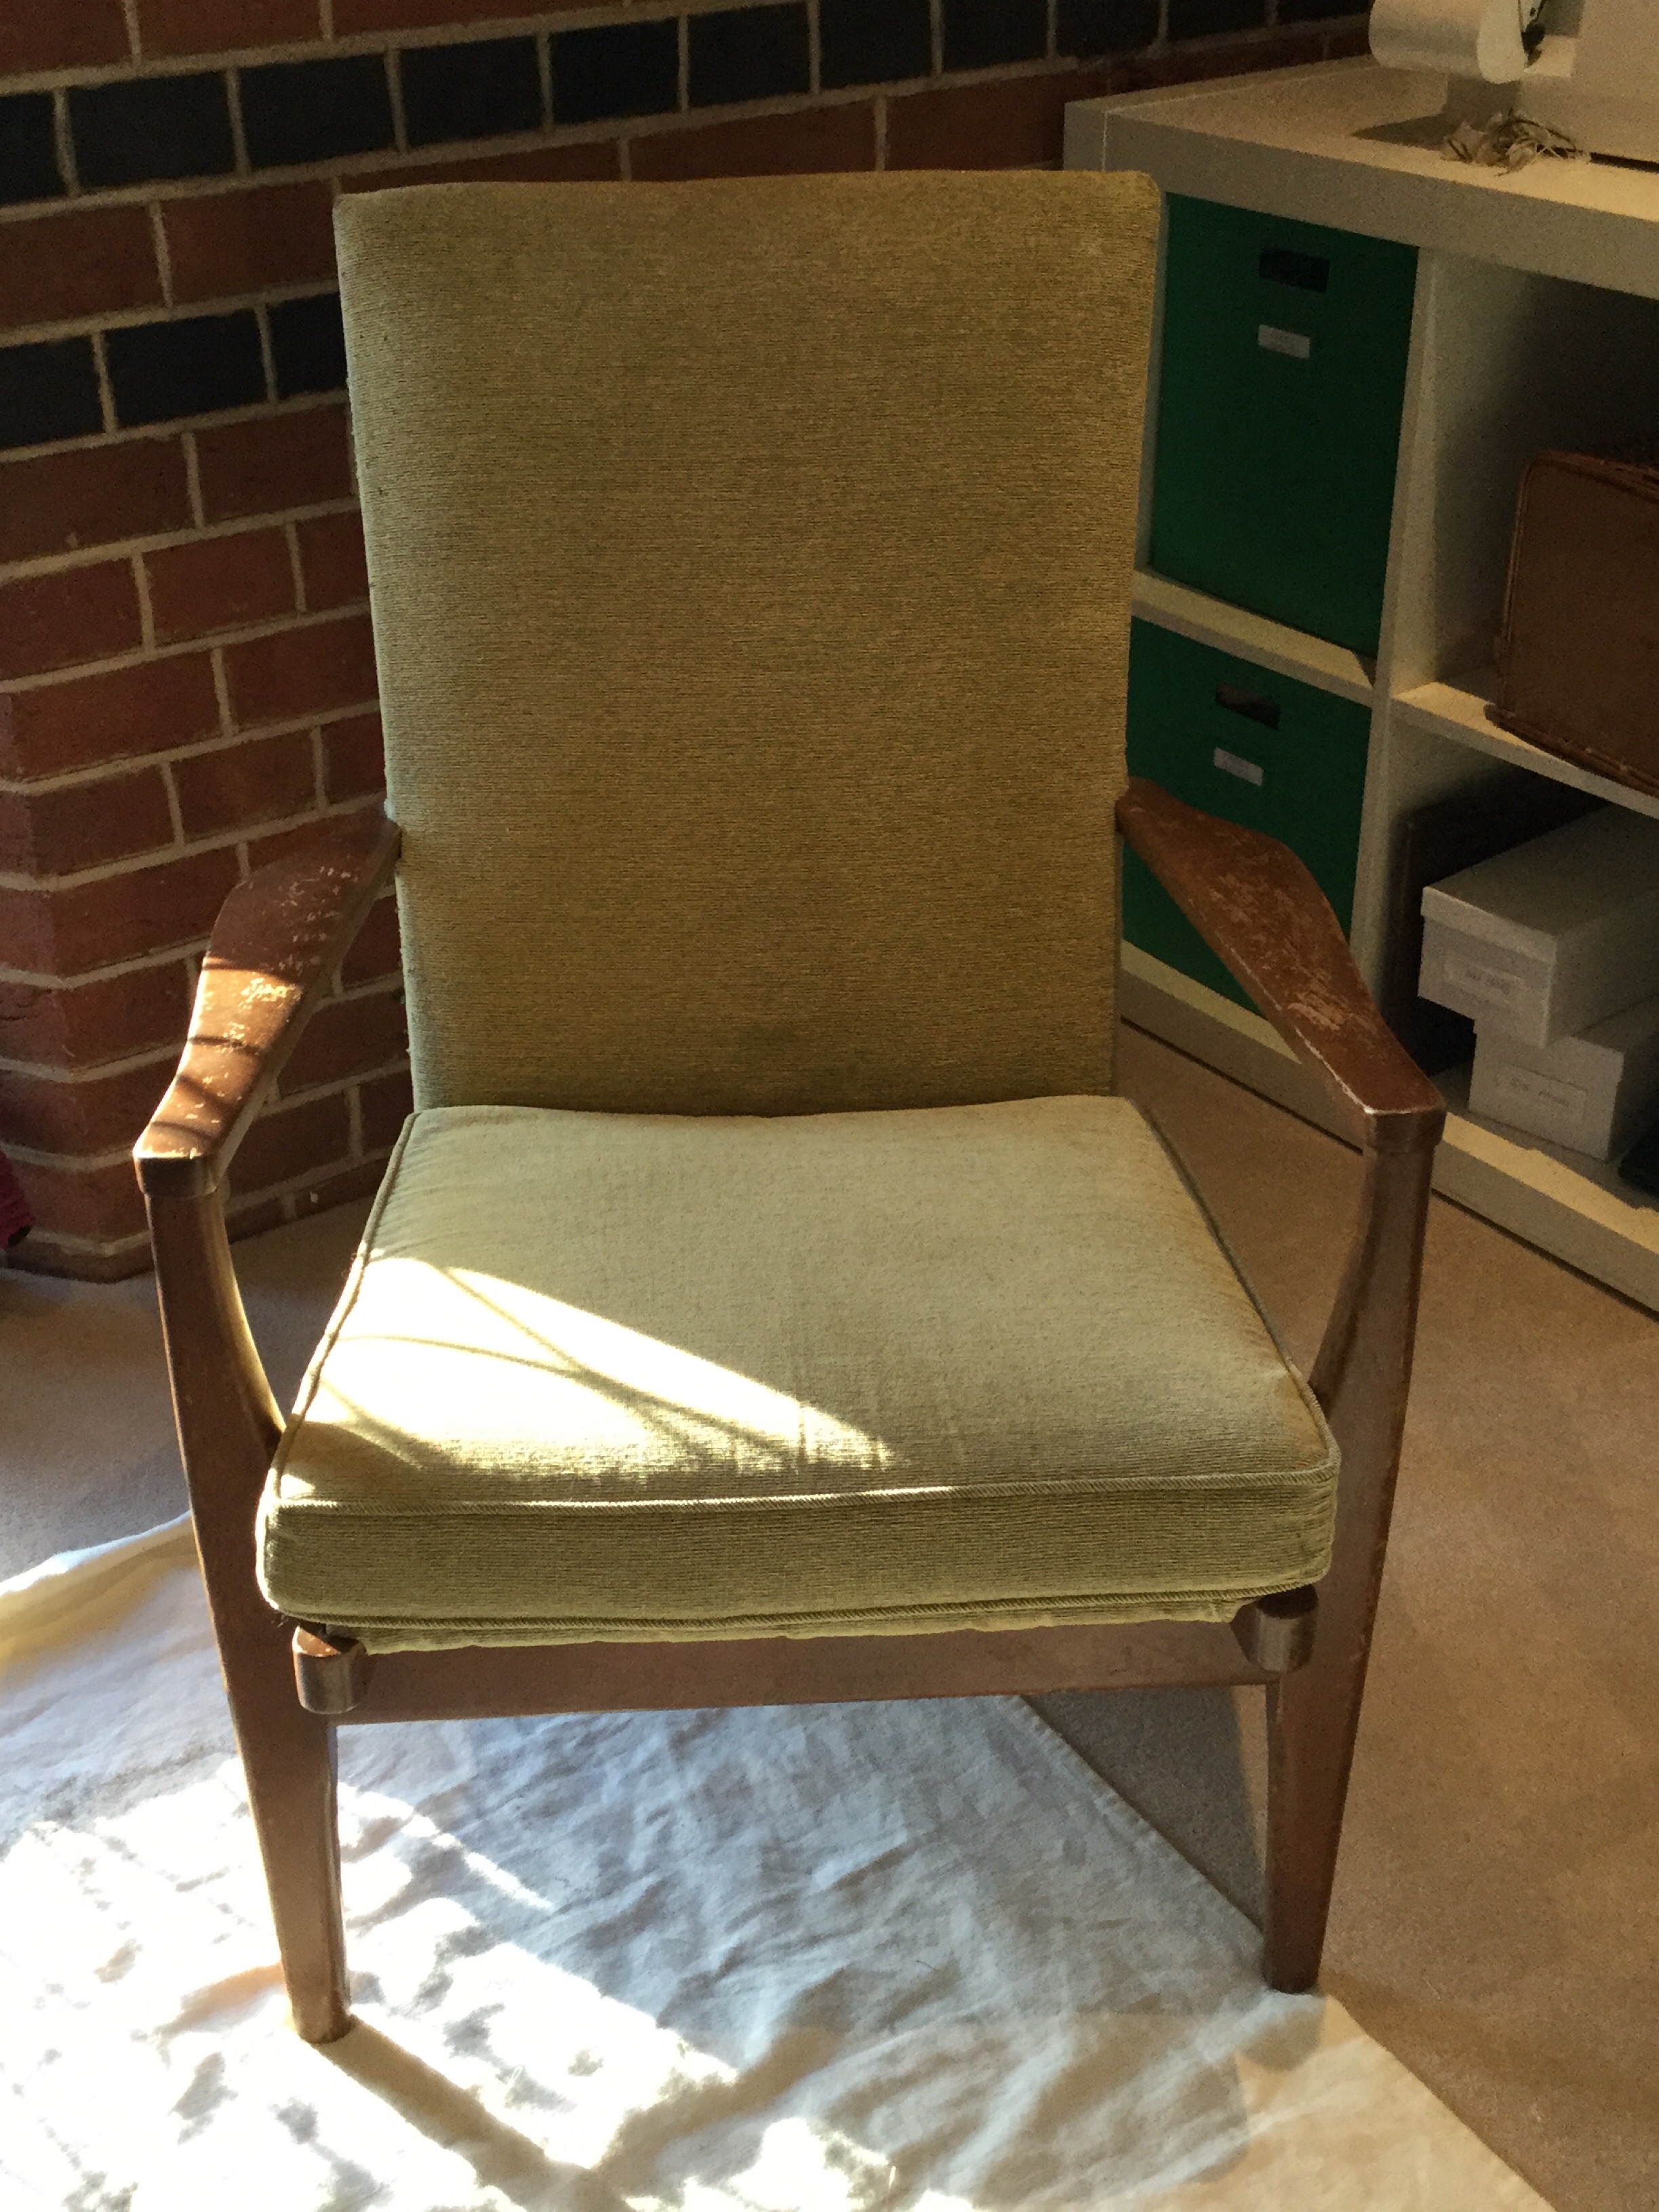 Parker Knoll Chair in Zest Green before refurb